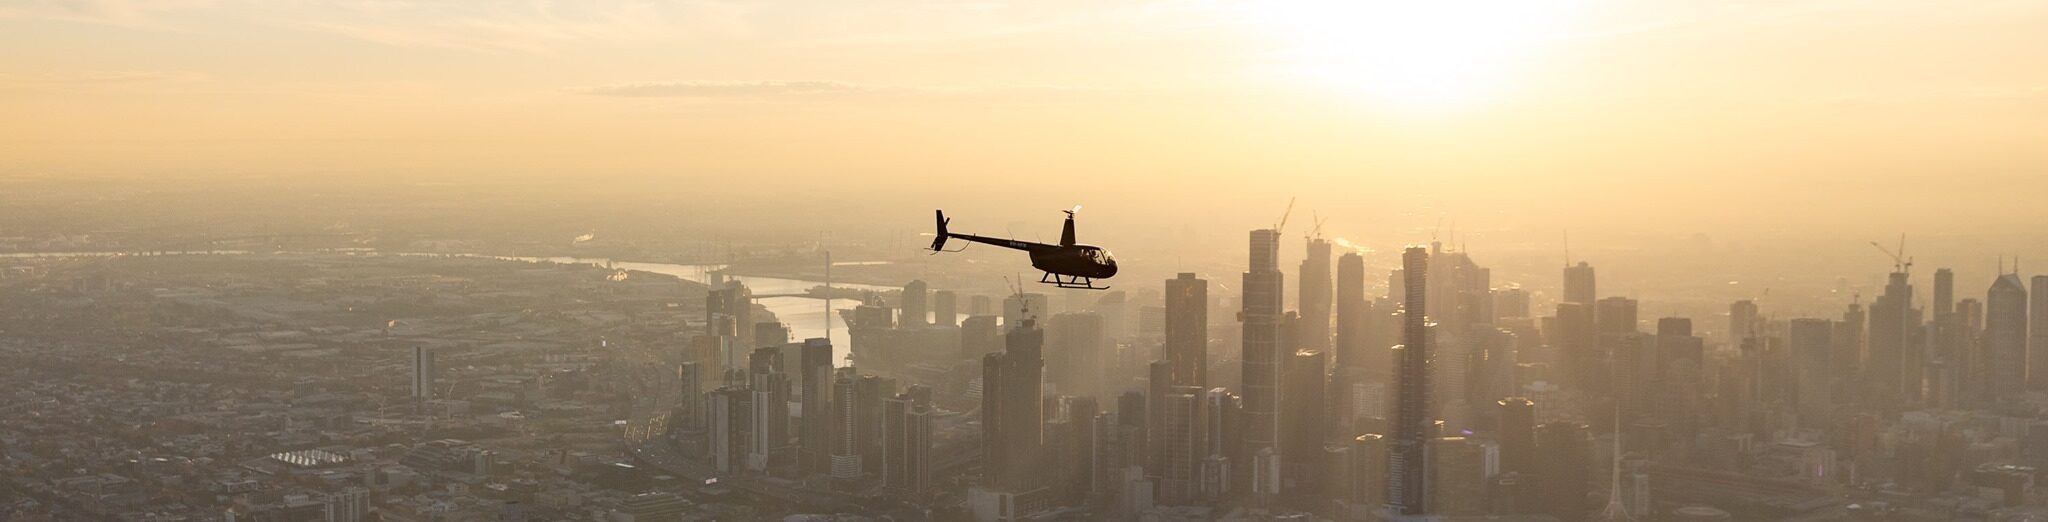 Scenic Flights, Melbourne tours, Melbourne Helicopter, Melbourne helicopter rides, tours of Melbourne, helicopter sightseeing tours